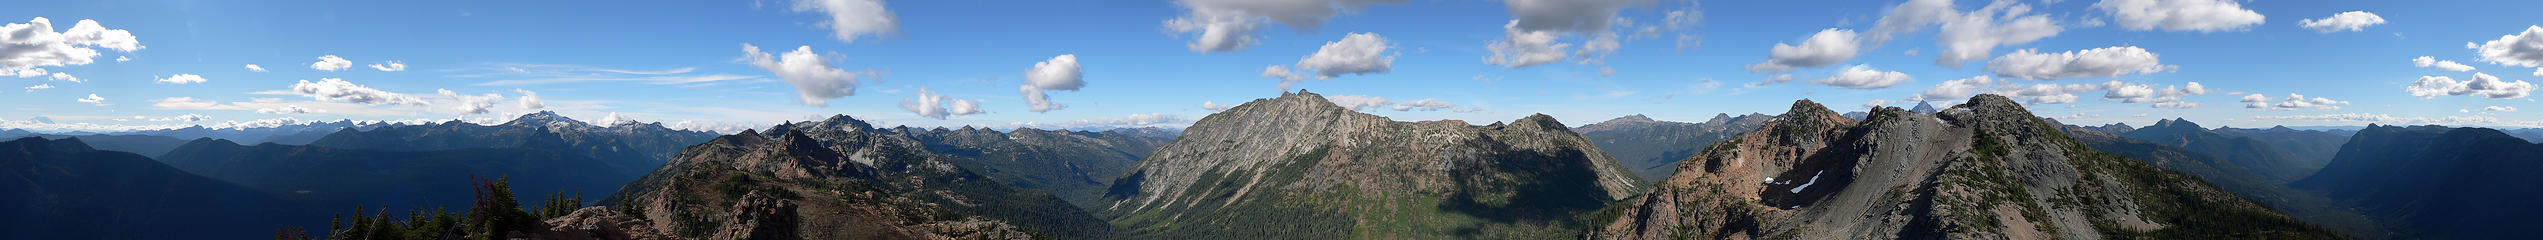 Panoramic view from the summit of Paddy Go Easy S Peak, taken 9.22.09.